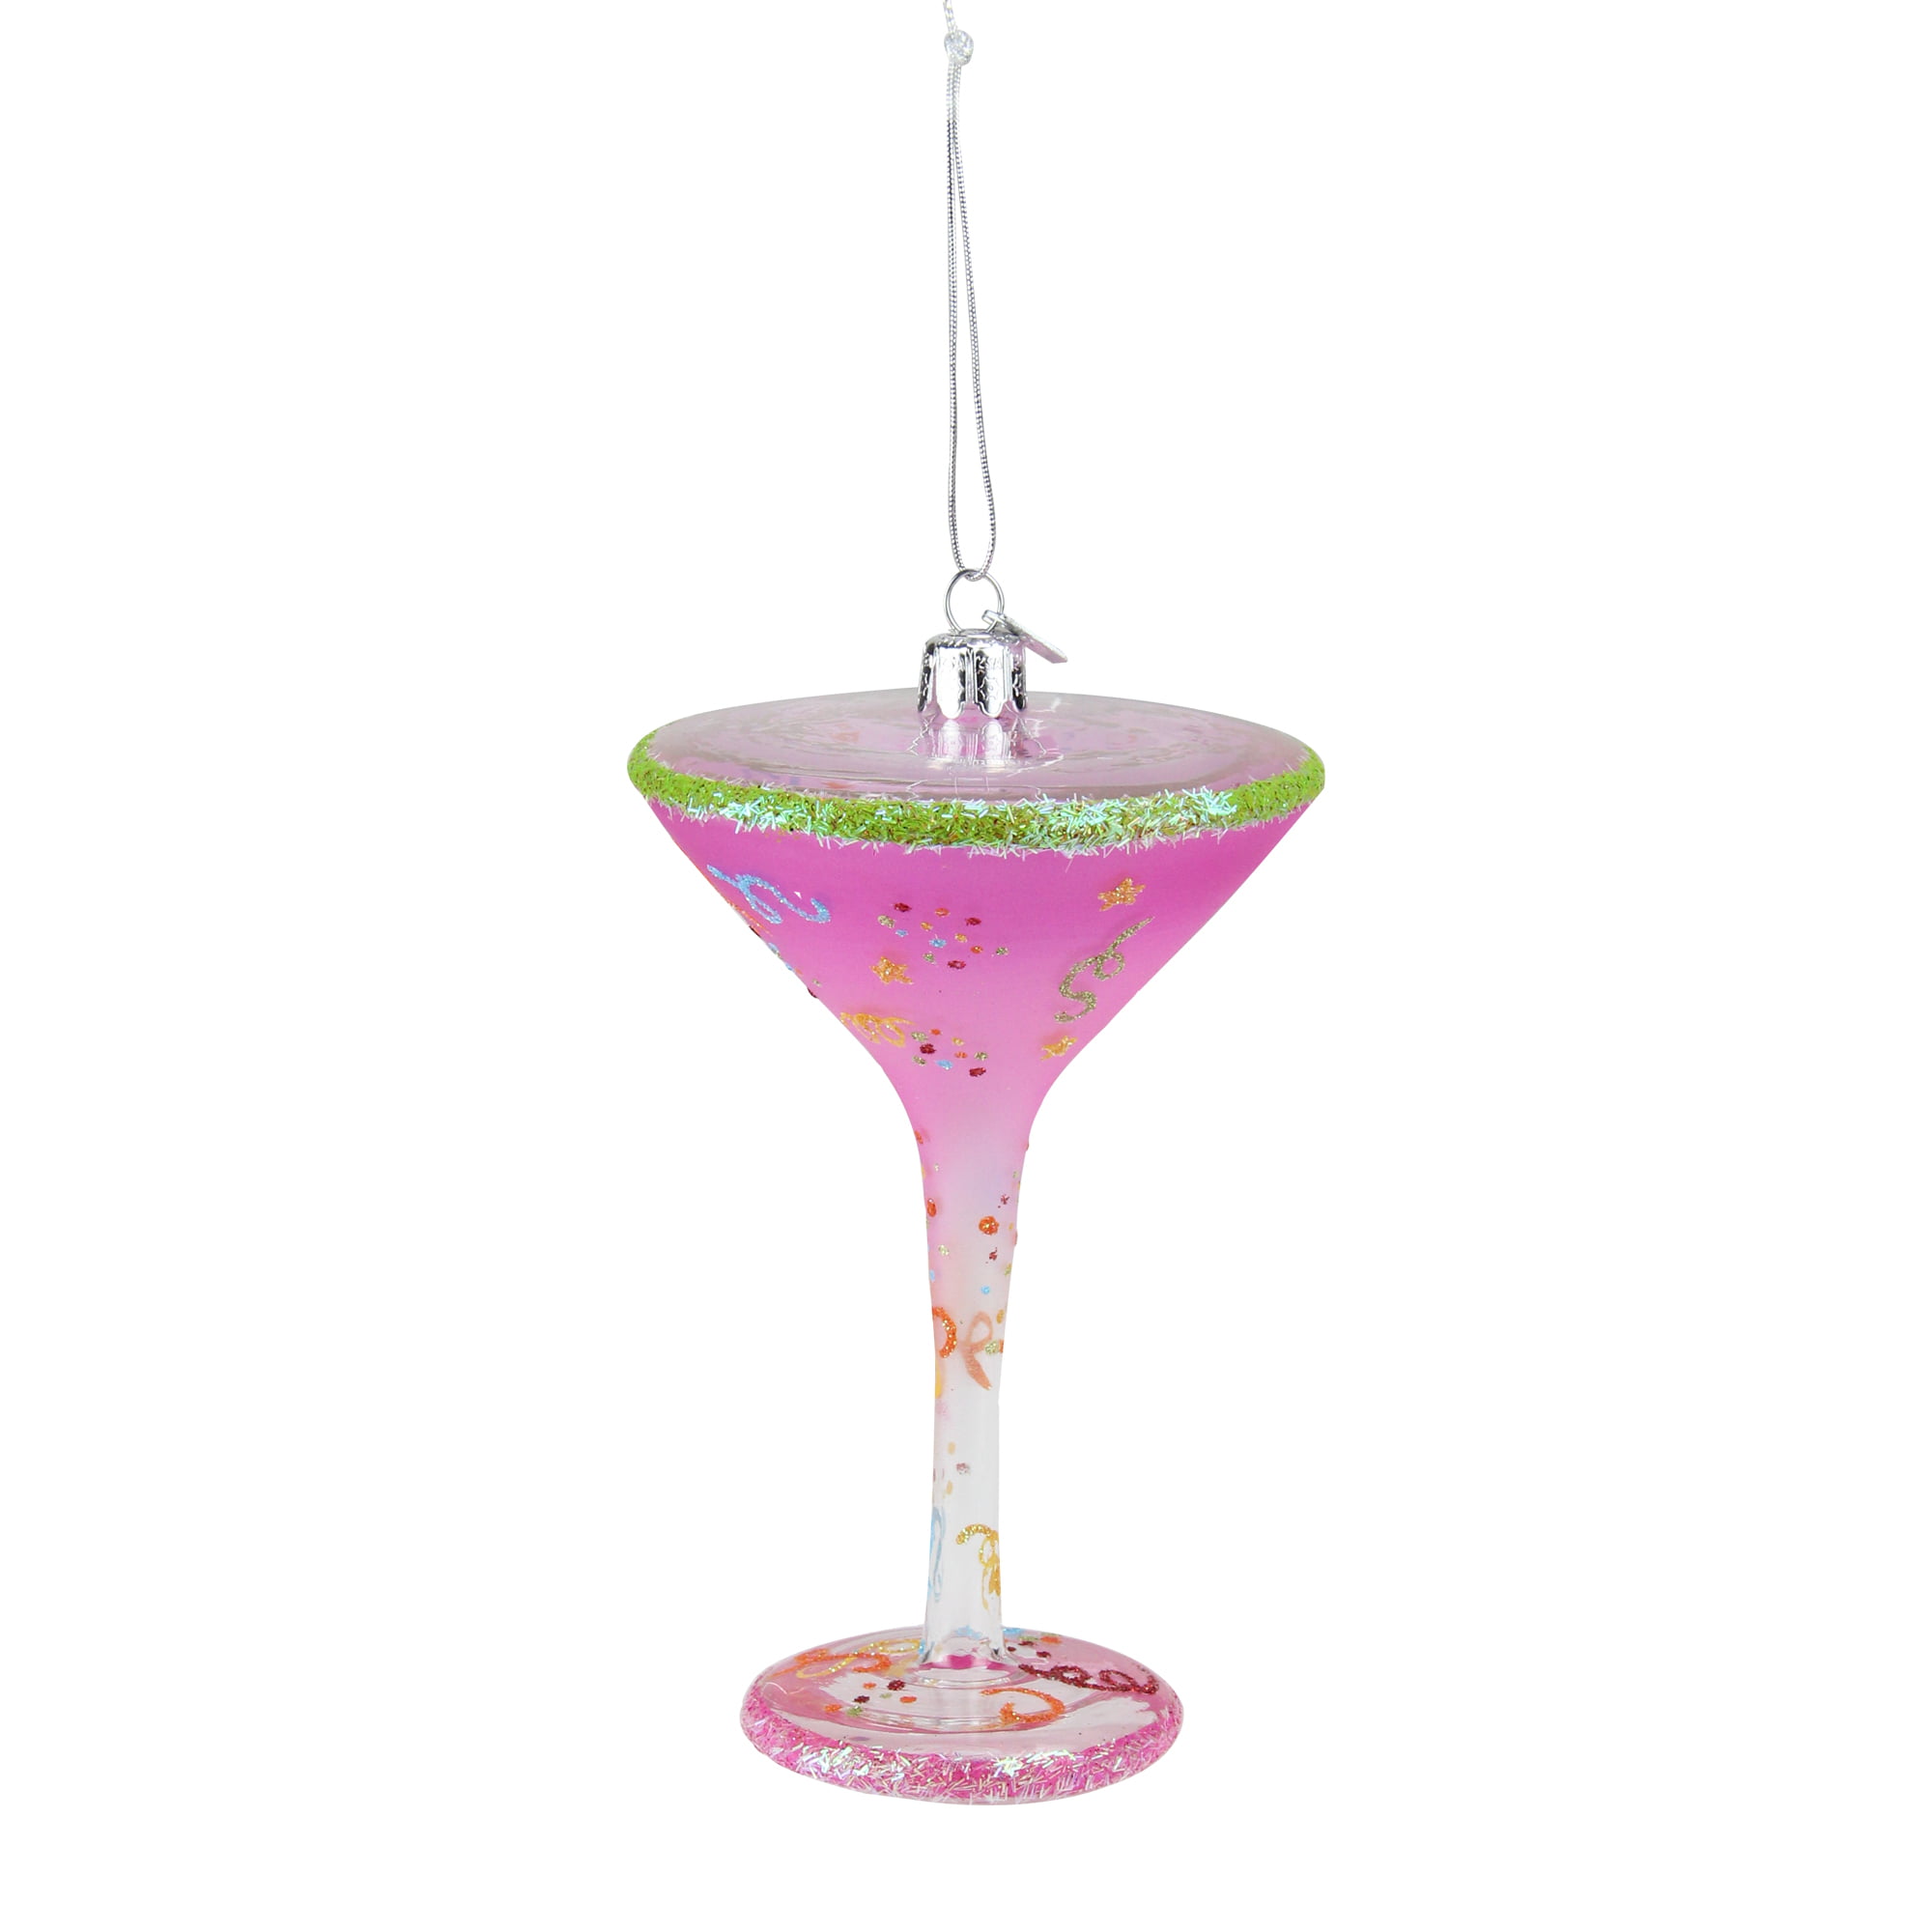 Doll bathing in martini glass full of gold glitter on pink